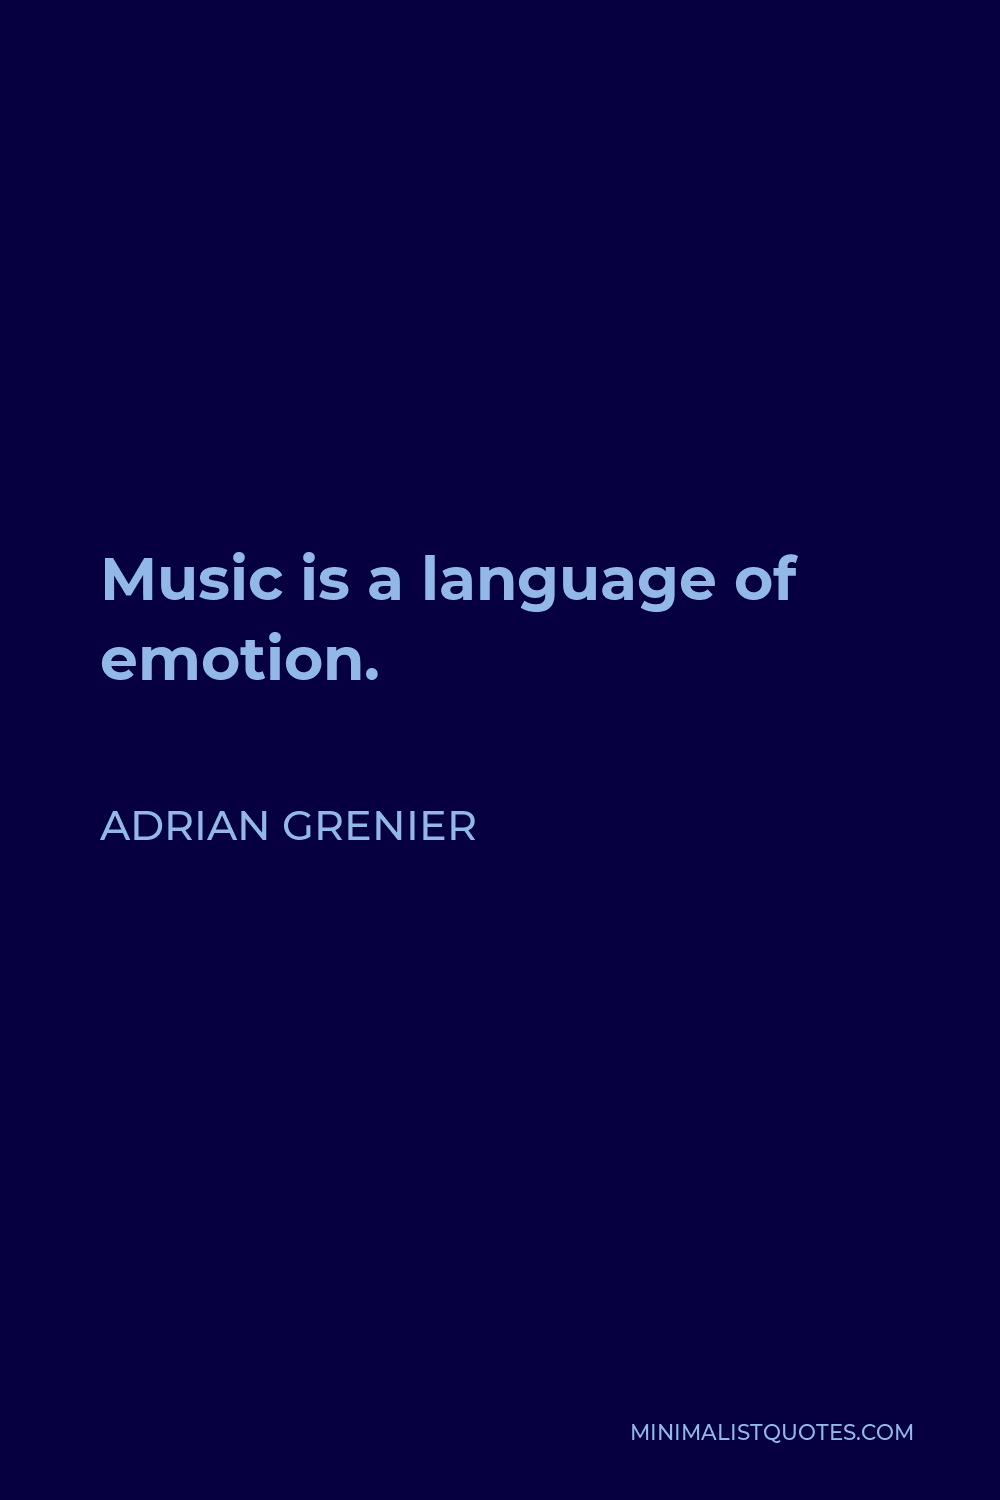 Adrian Grenier Quote - Music is a language of emotion.